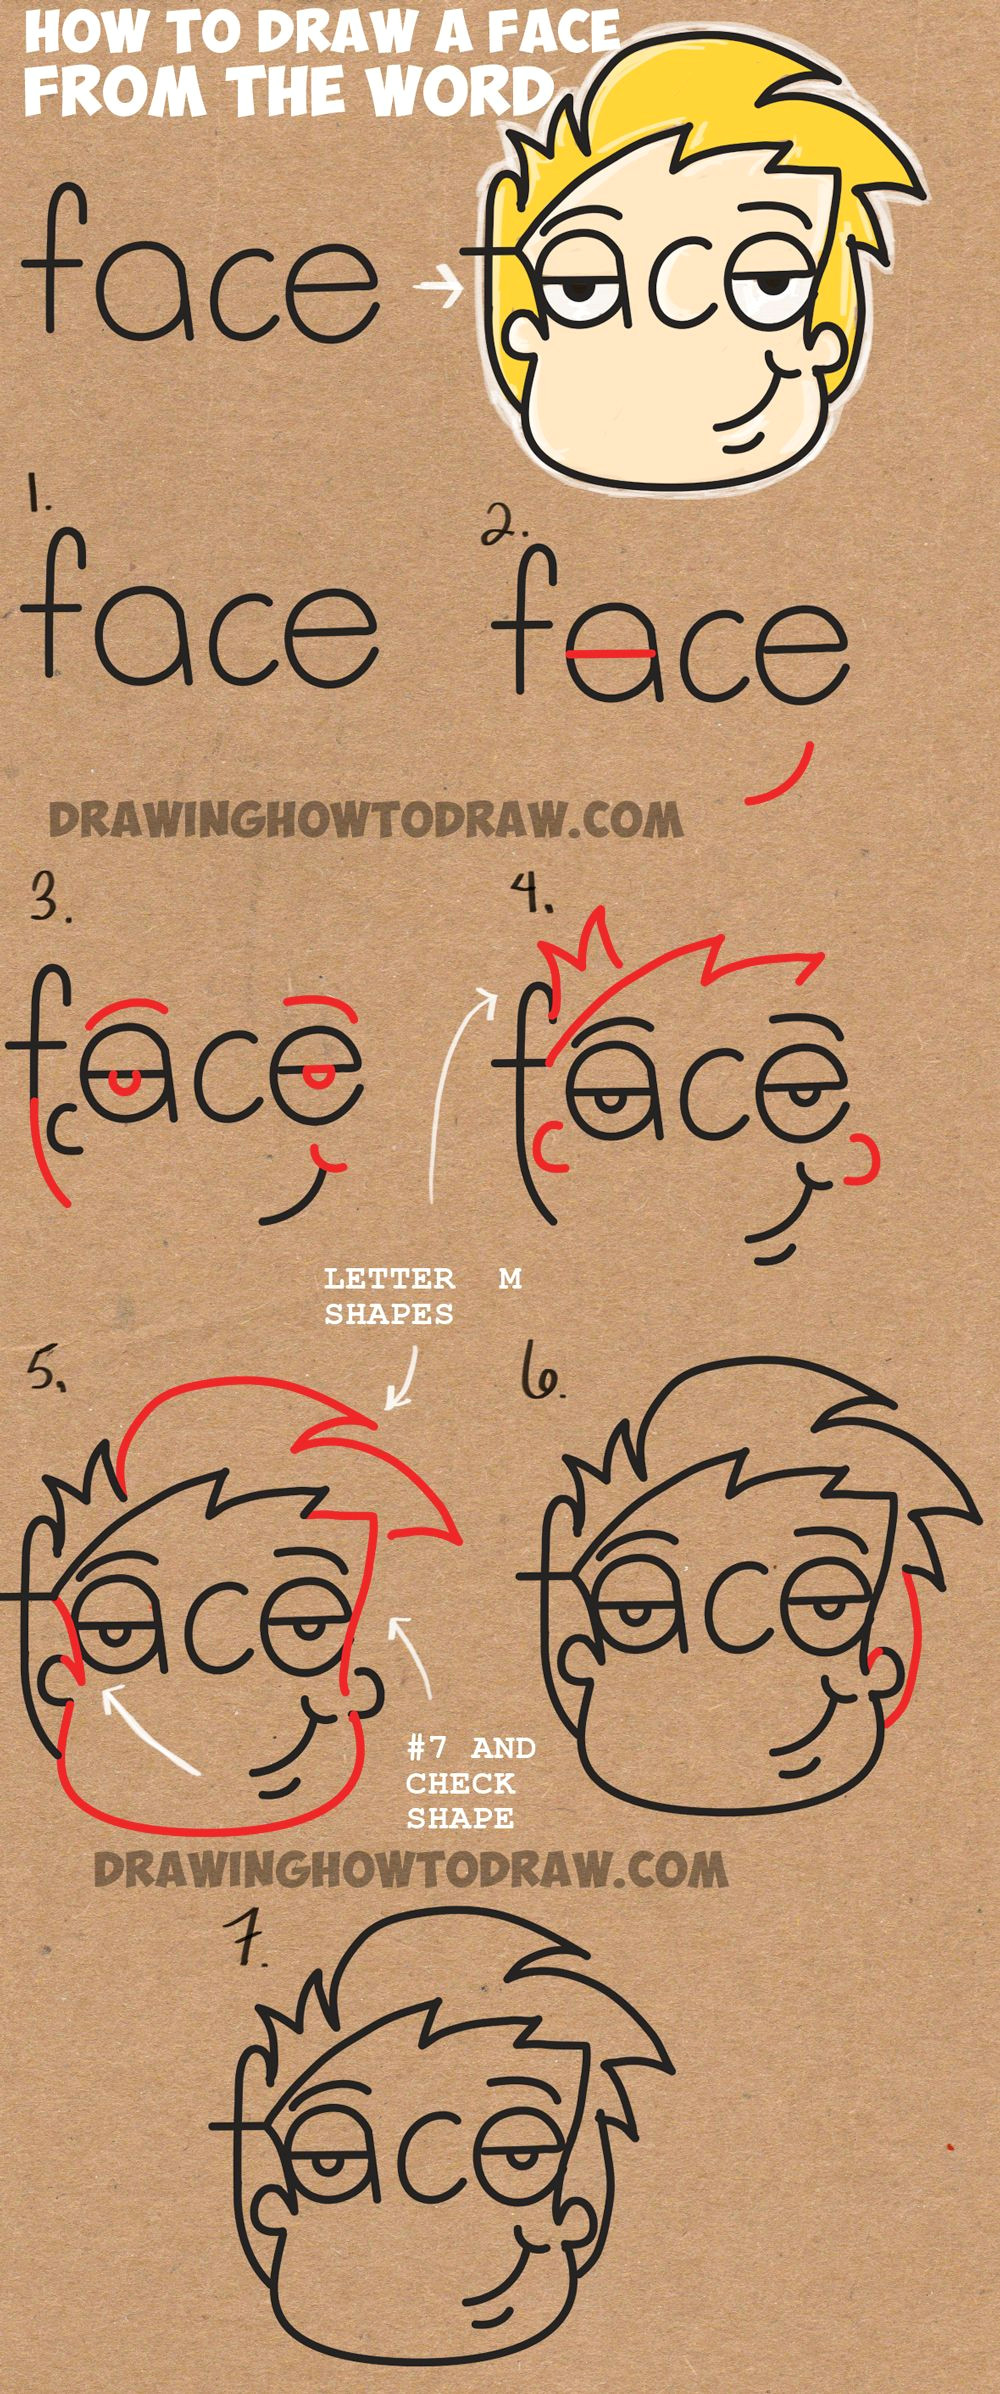 Drawing Using Words How to Draw Cartoon Faces From the Word Face Easy Step by Step